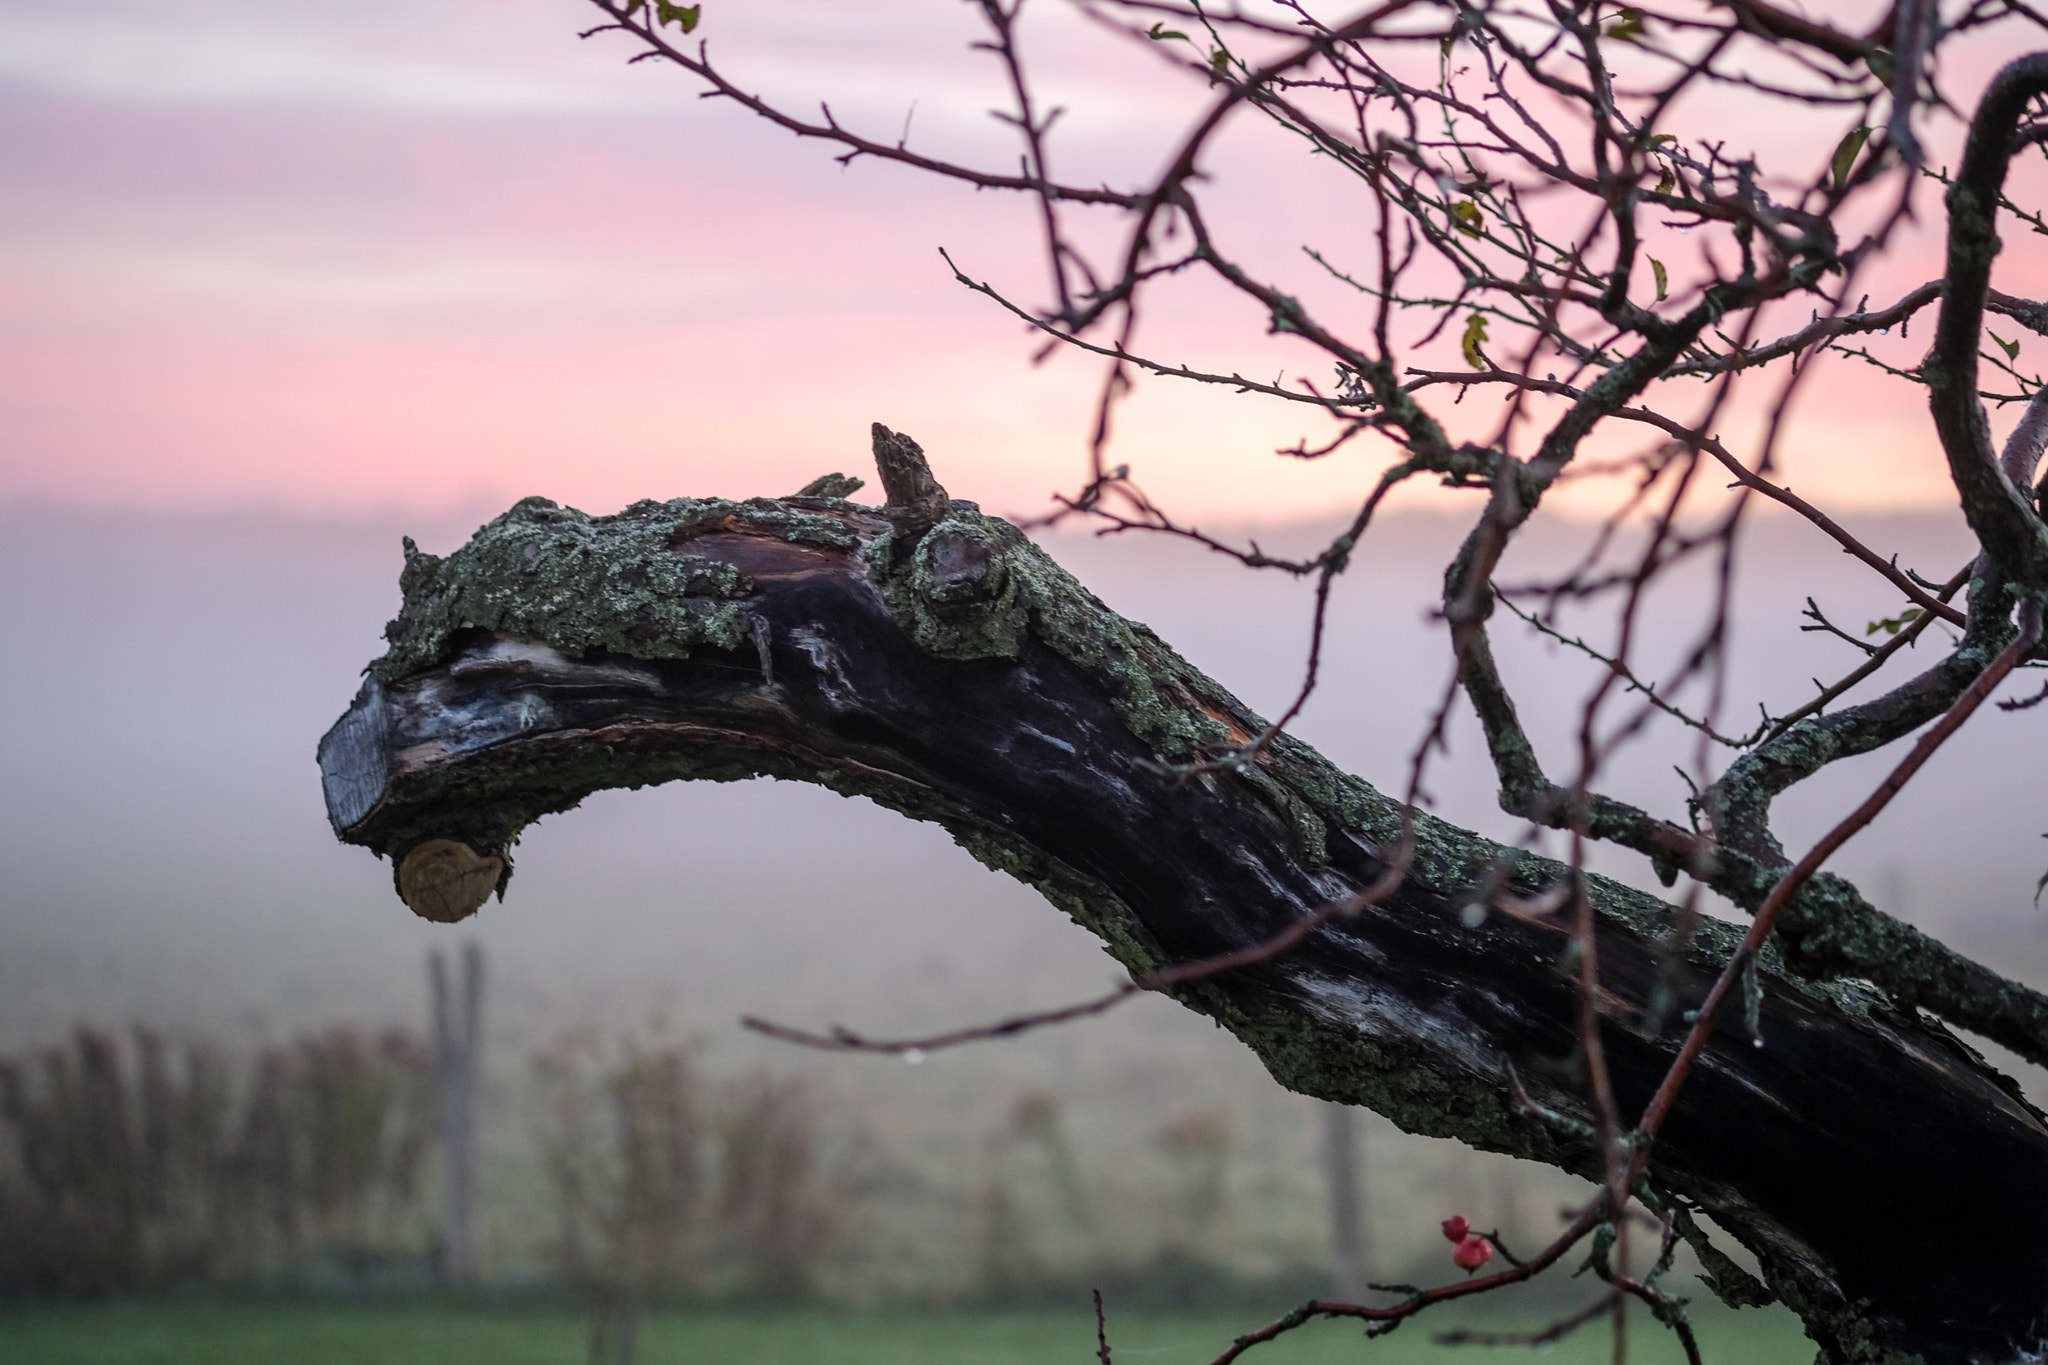 Fujifilm X-T2 sample photo. Dragon tree - twisted old apple tree in morning light photography